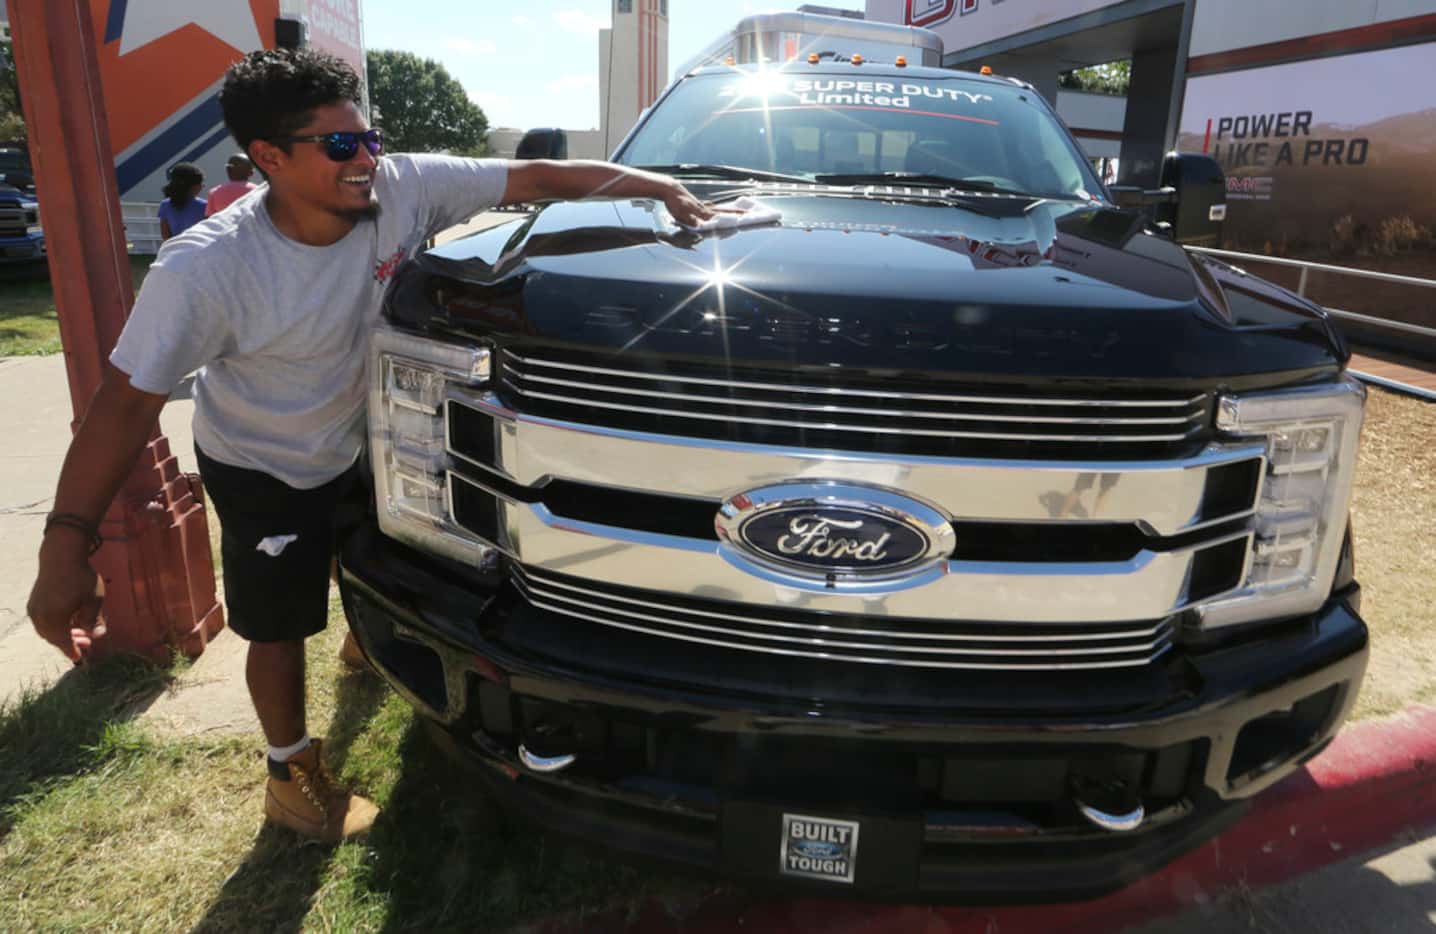 David Ruiz polishes a fully loaded F-450 Super Duty Limited, the biggest version of the Ford...